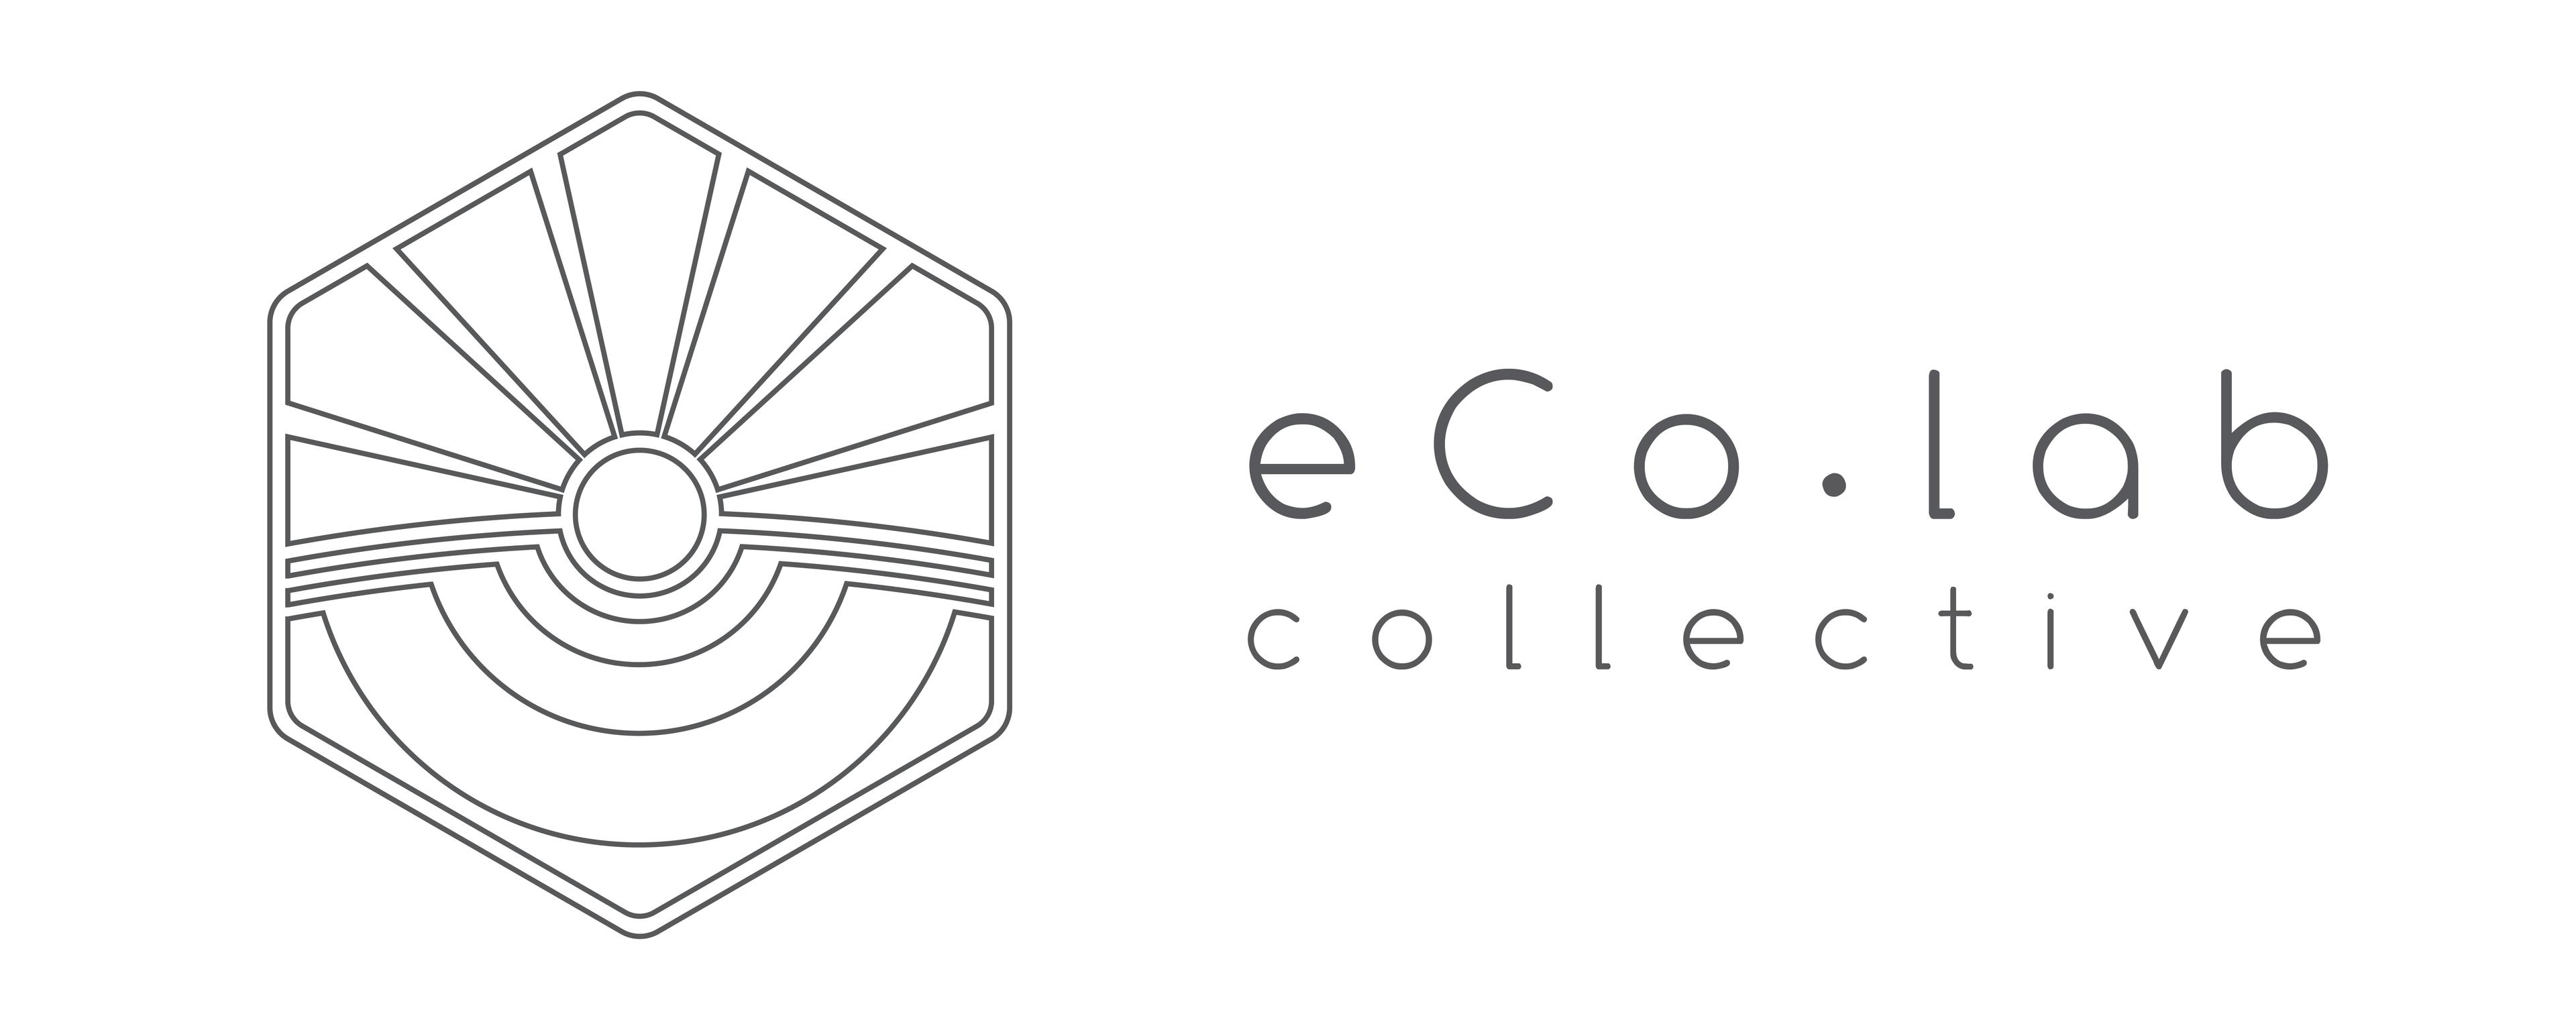 eCo-lab collective